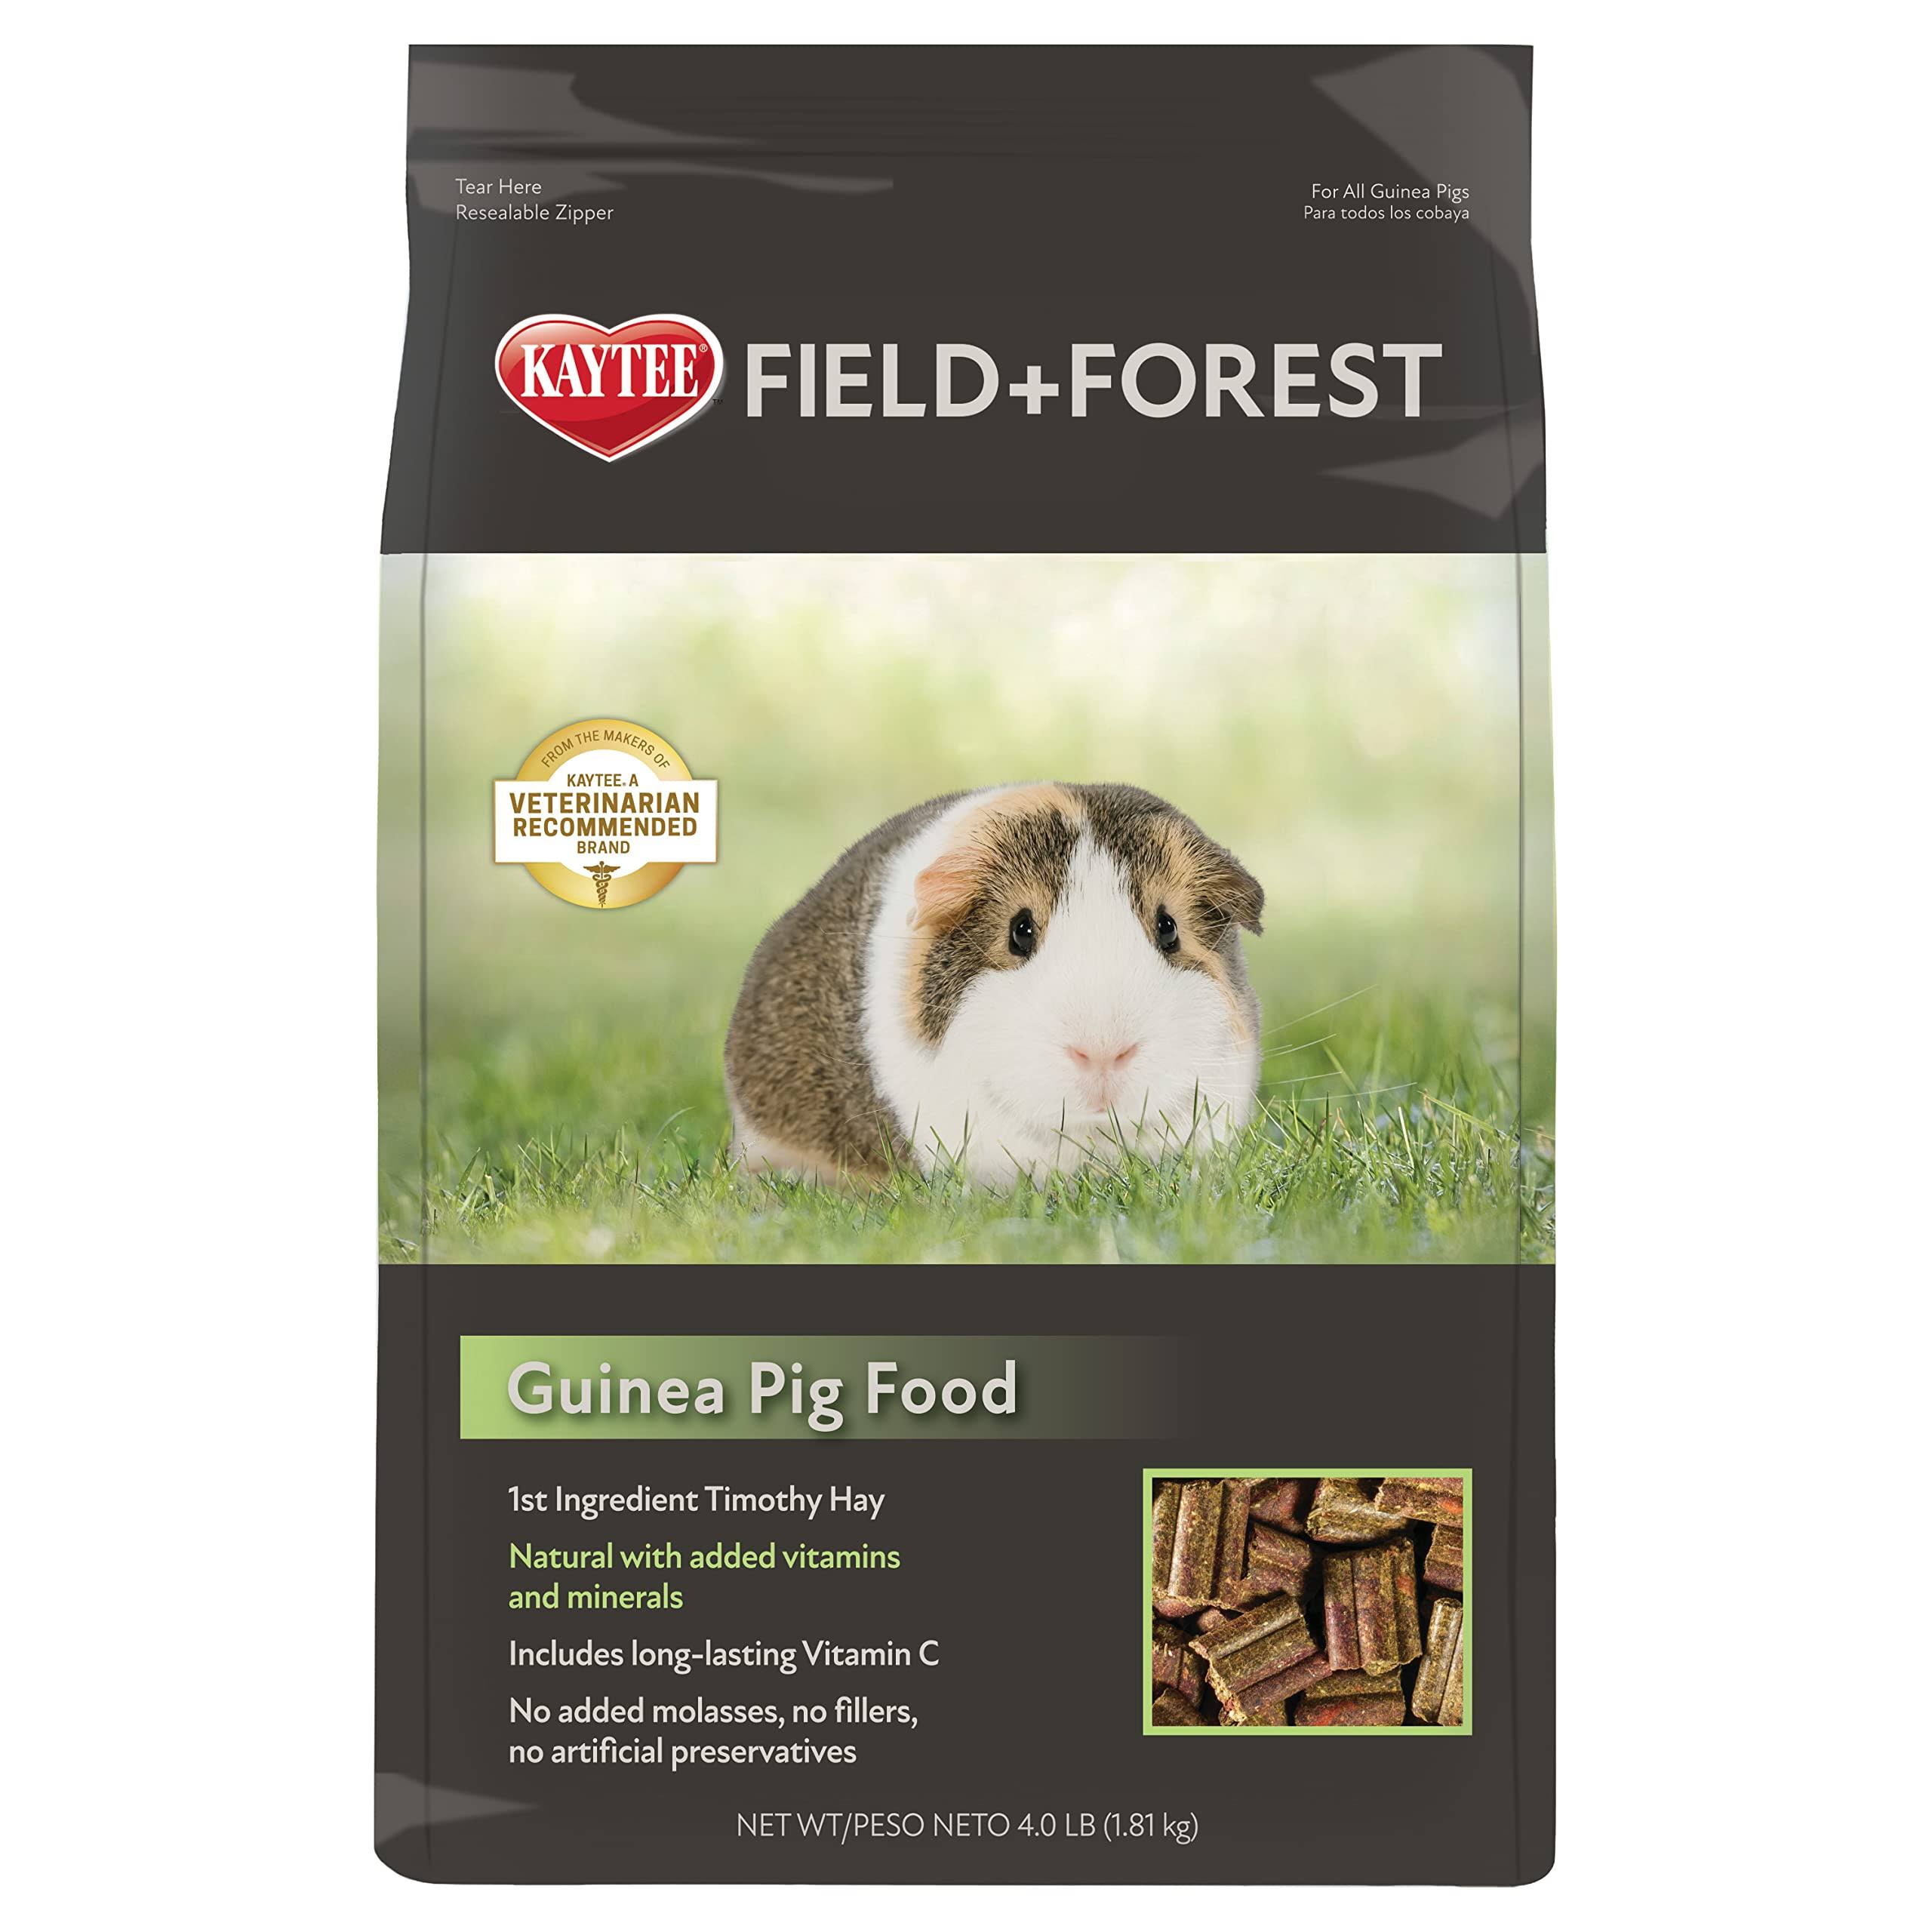 Field+Forest by Kaytee Guinea Pig Food 4 lb